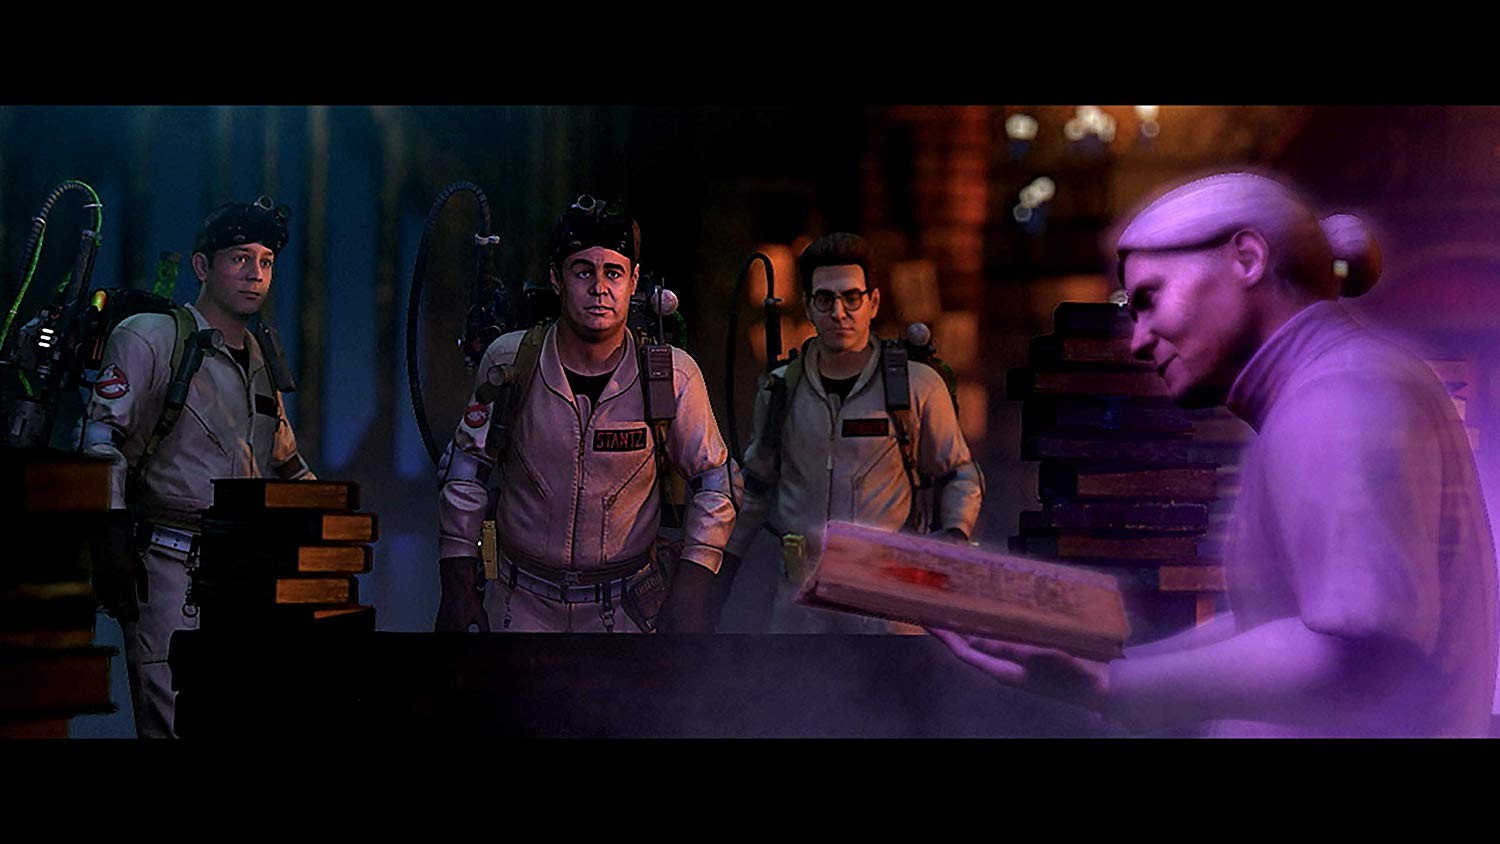 ghostbusters game, ghostbusters: the video game remstered, ps4, playstation 4, switch, nintendo switch, xone, xbox one, au, australia, europe,au, release date, EU, gameplay, features, price, pre-order,mad dog games, saber interactive